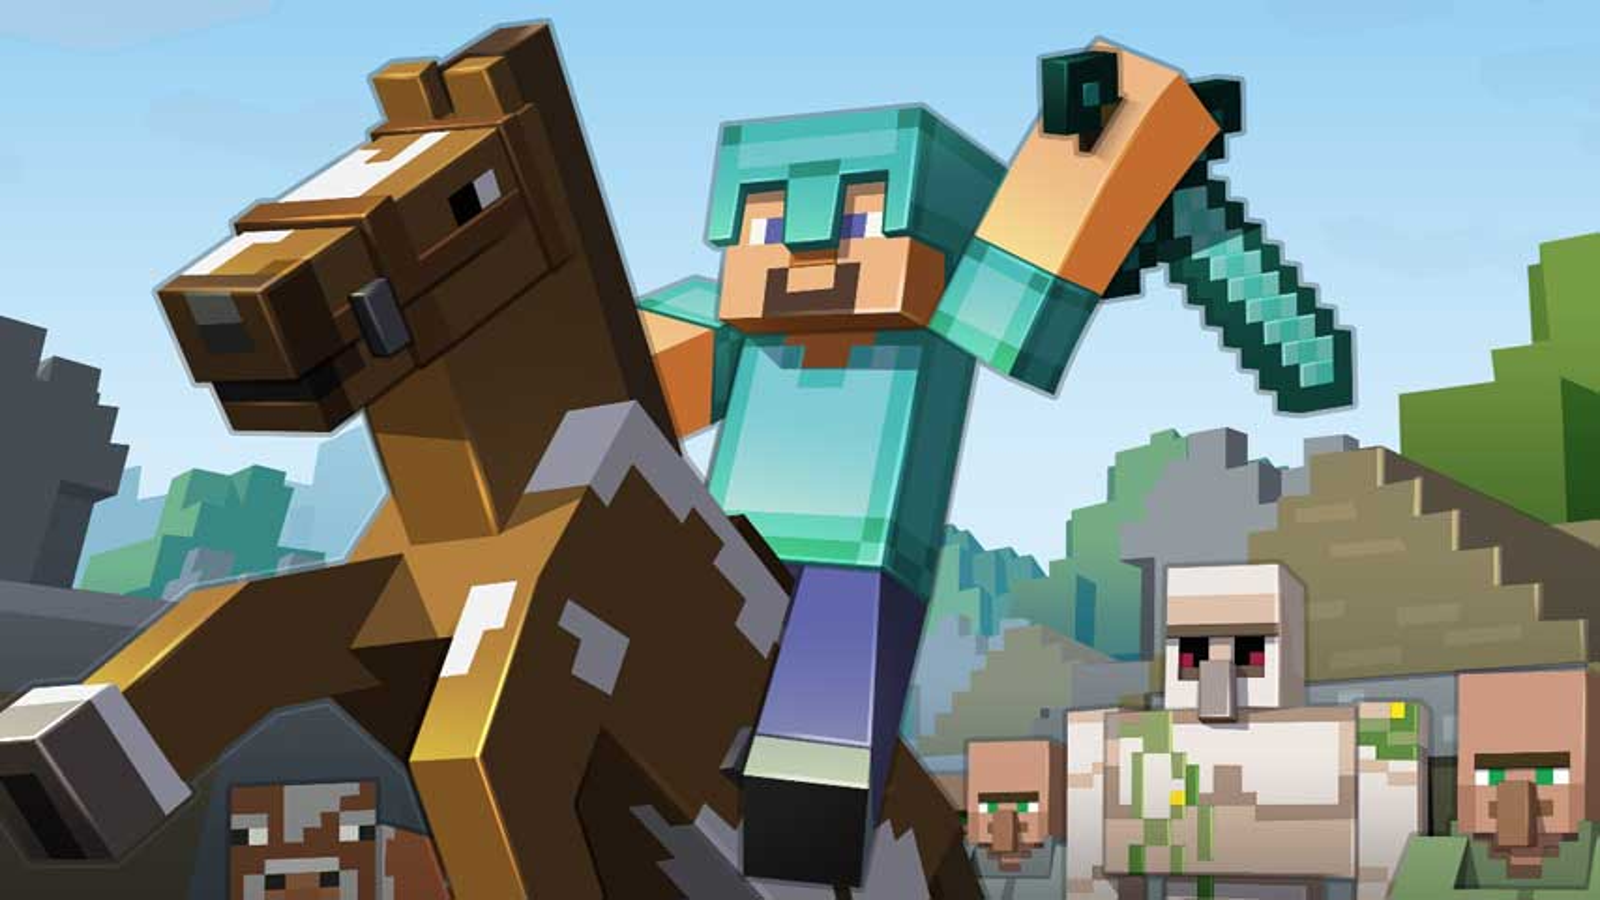 All Firsts Locations: How to Wake All First Of - Minecraft Legends Guide -  IGN